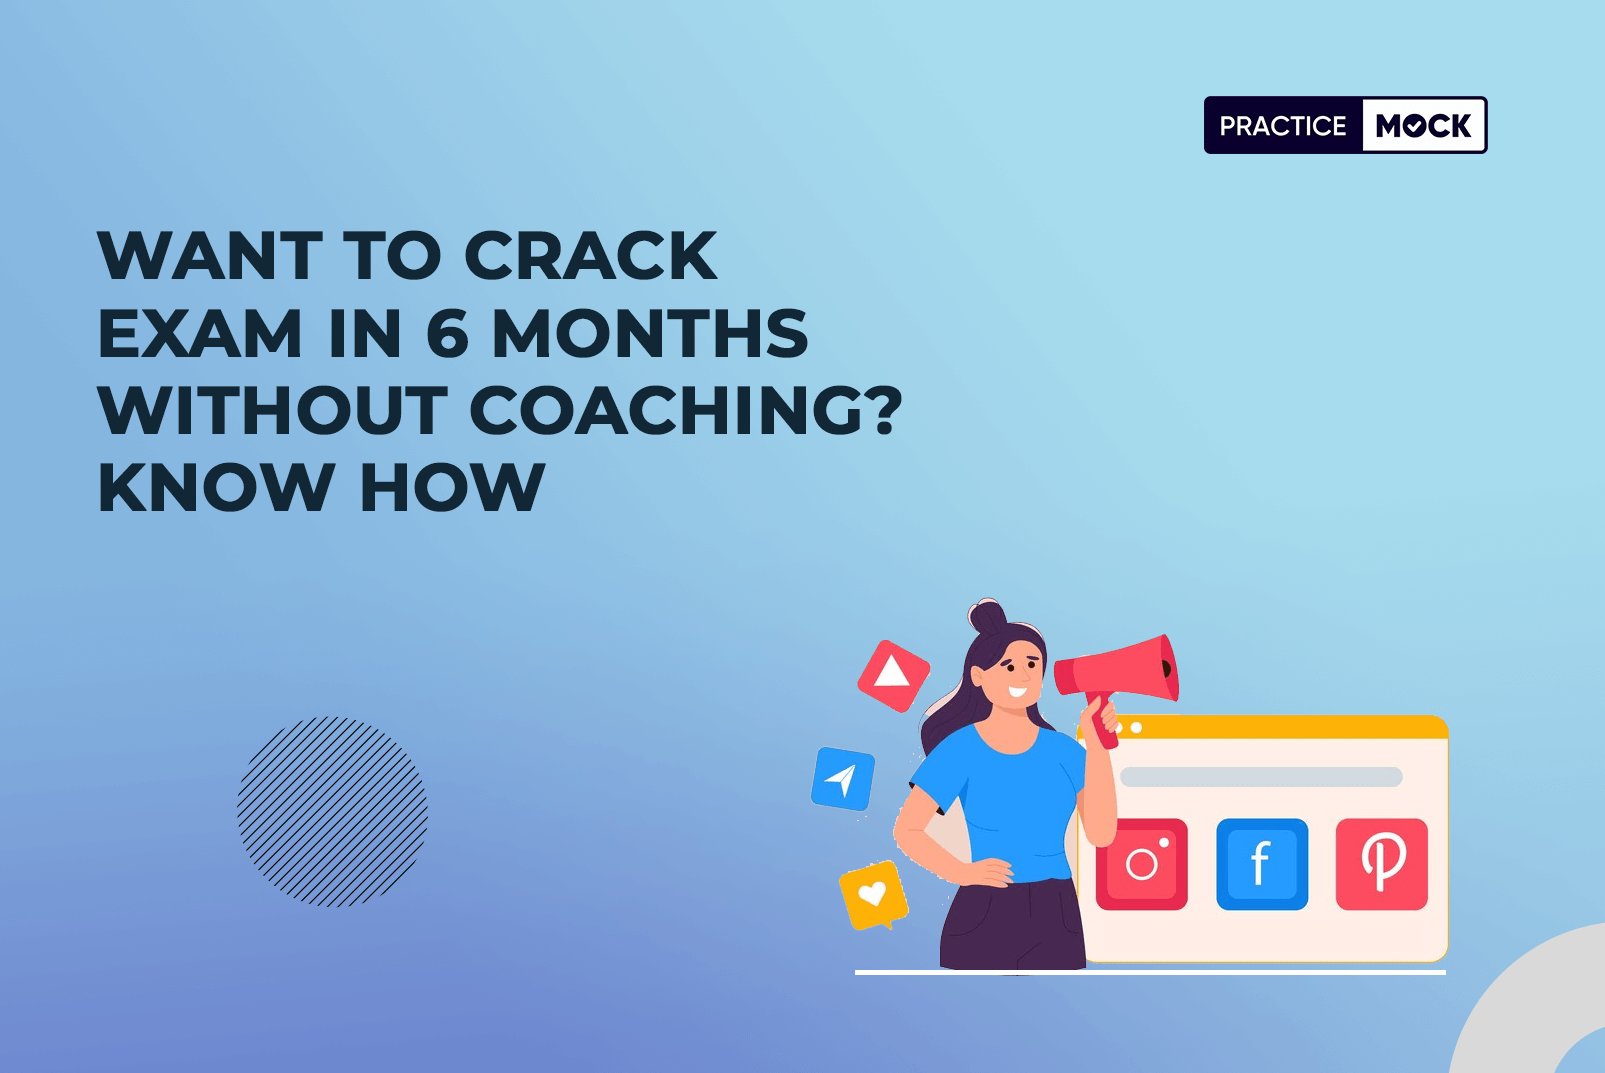 Want to Crack Exam in 6 Months Without Coaching? Know How